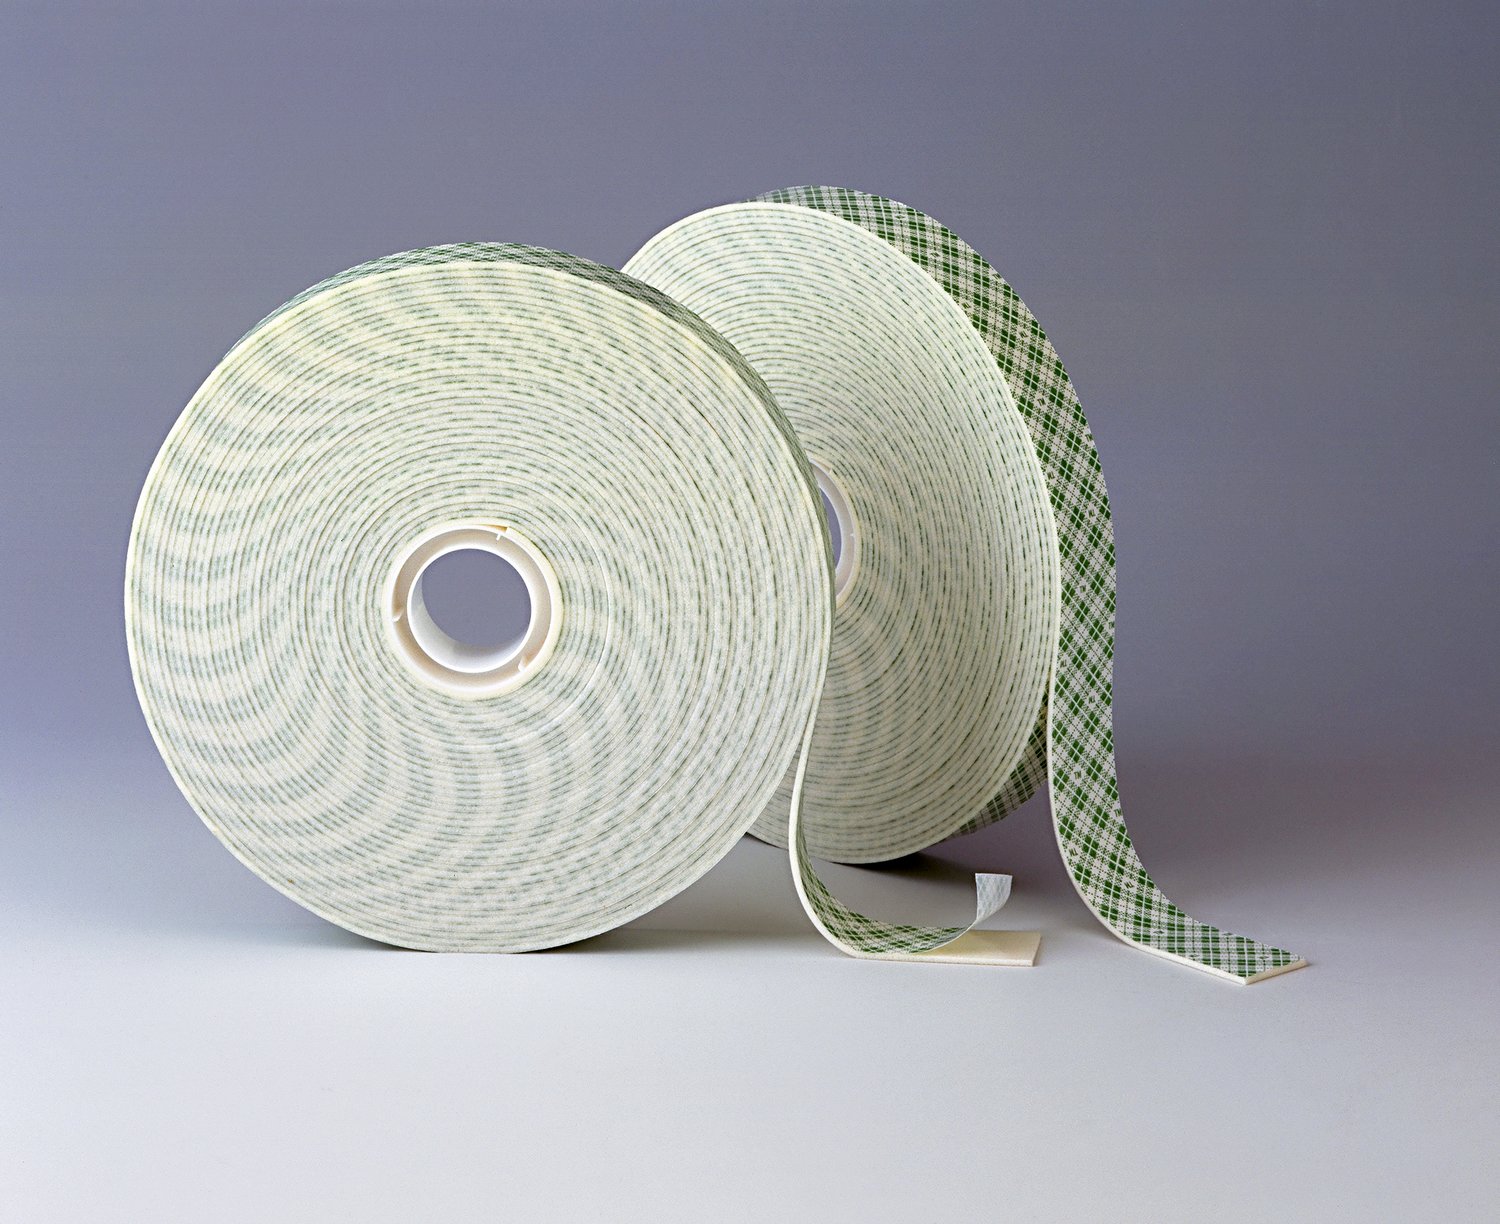 7000123340 - 3M Double Coated Urethane Foam Tape 4026, Natural, 1 in x 36 yd, 62
mil, 9 Rolls/Case